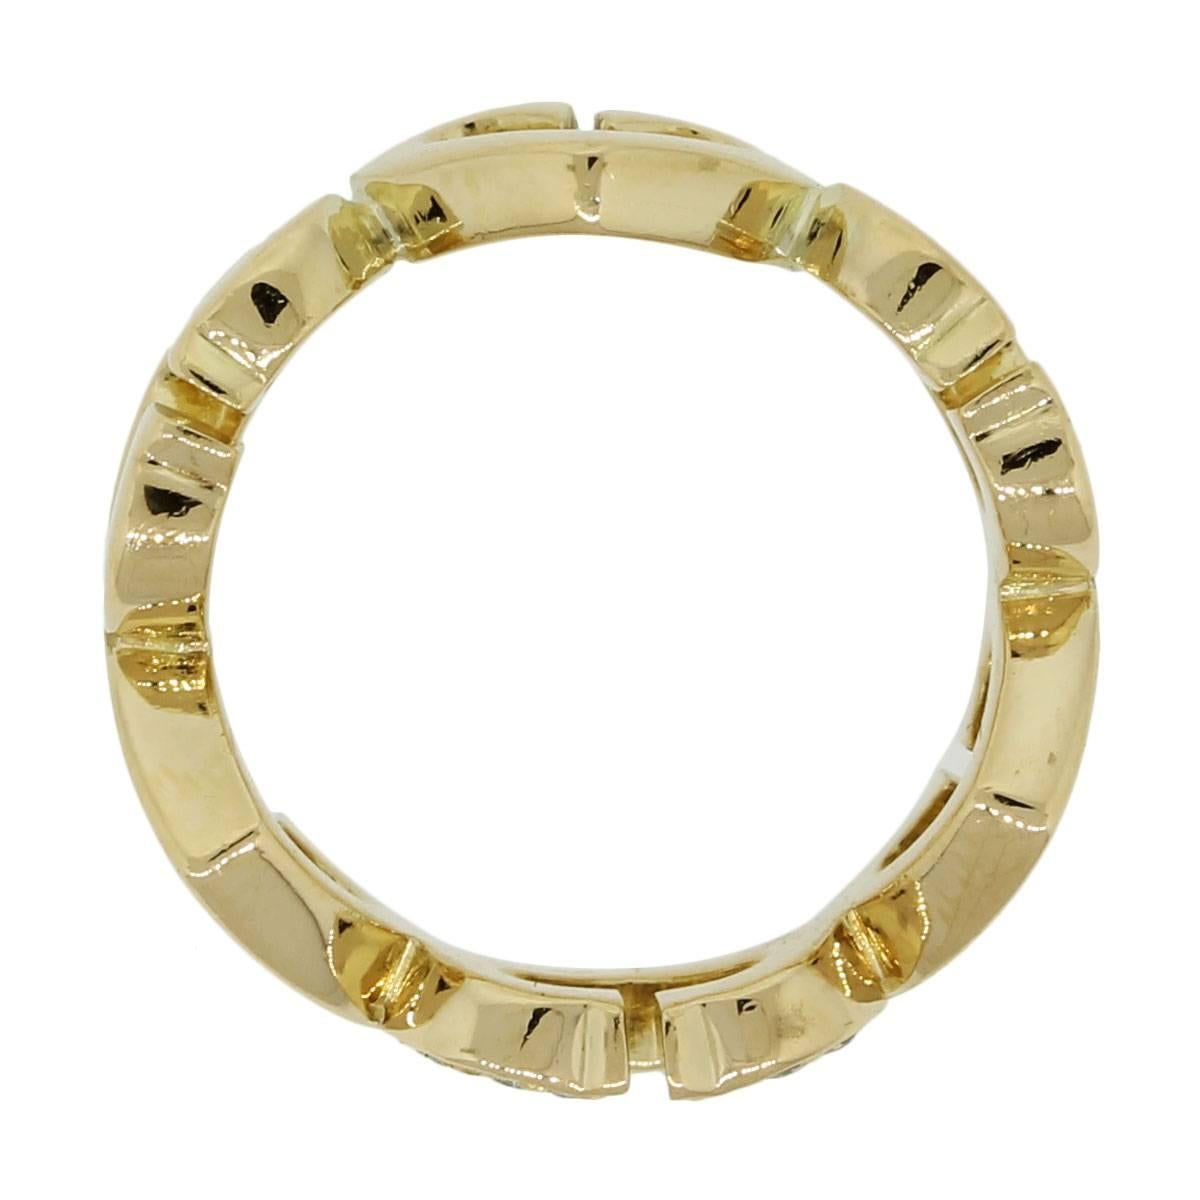 Brand: Cartier
Material: 18k Yellow Gold
Diamond Details: Approximately 0.06ctw of round brilliant diamonds. Diamonds are G/H in color and VS in clarity.
Ring Size: Size 4
Ring Measurements: 0.75